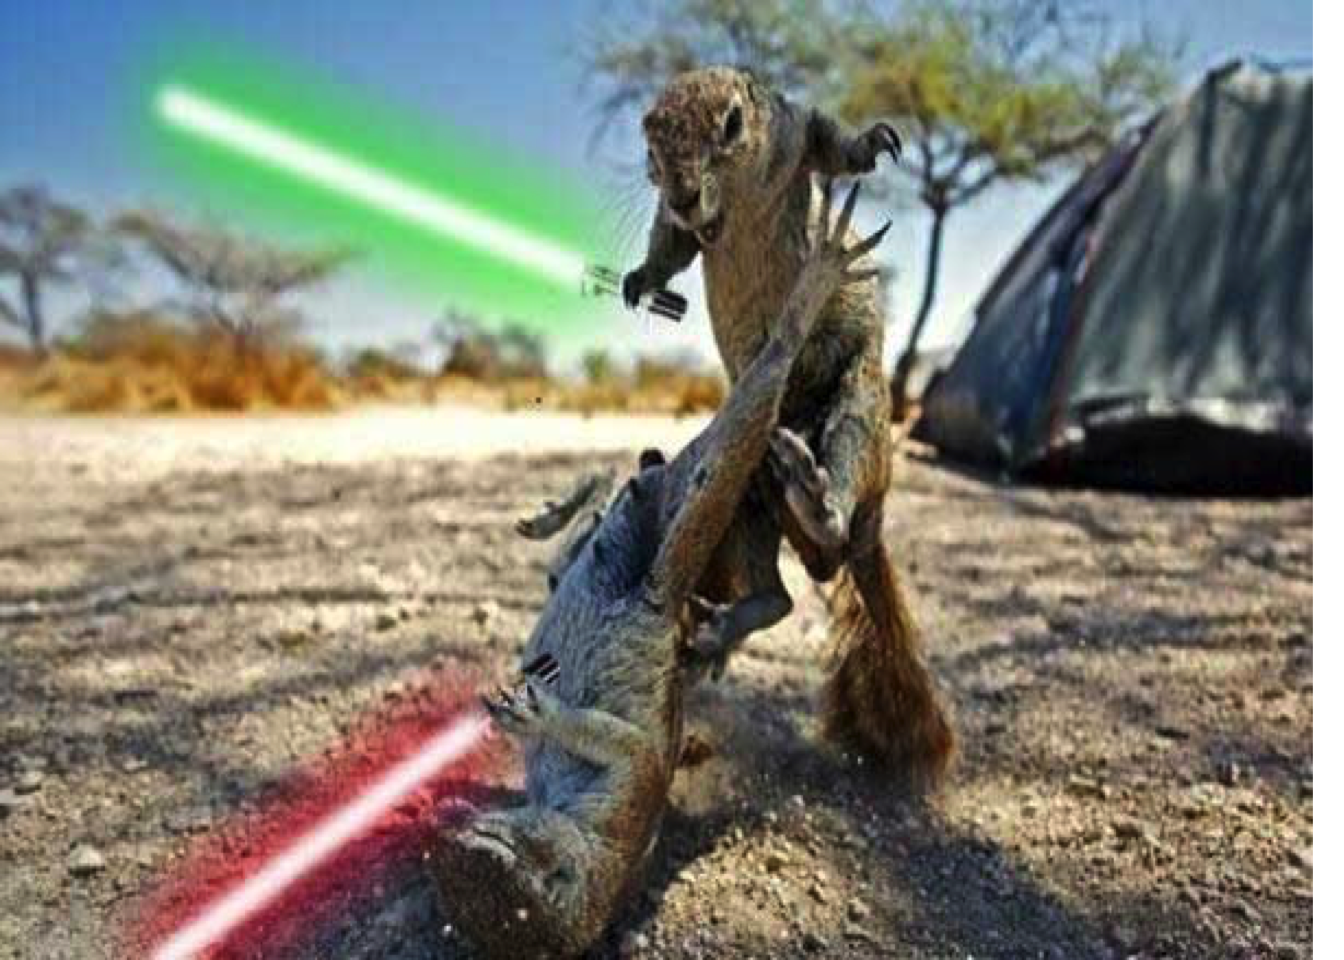 squirrels with lightsabers